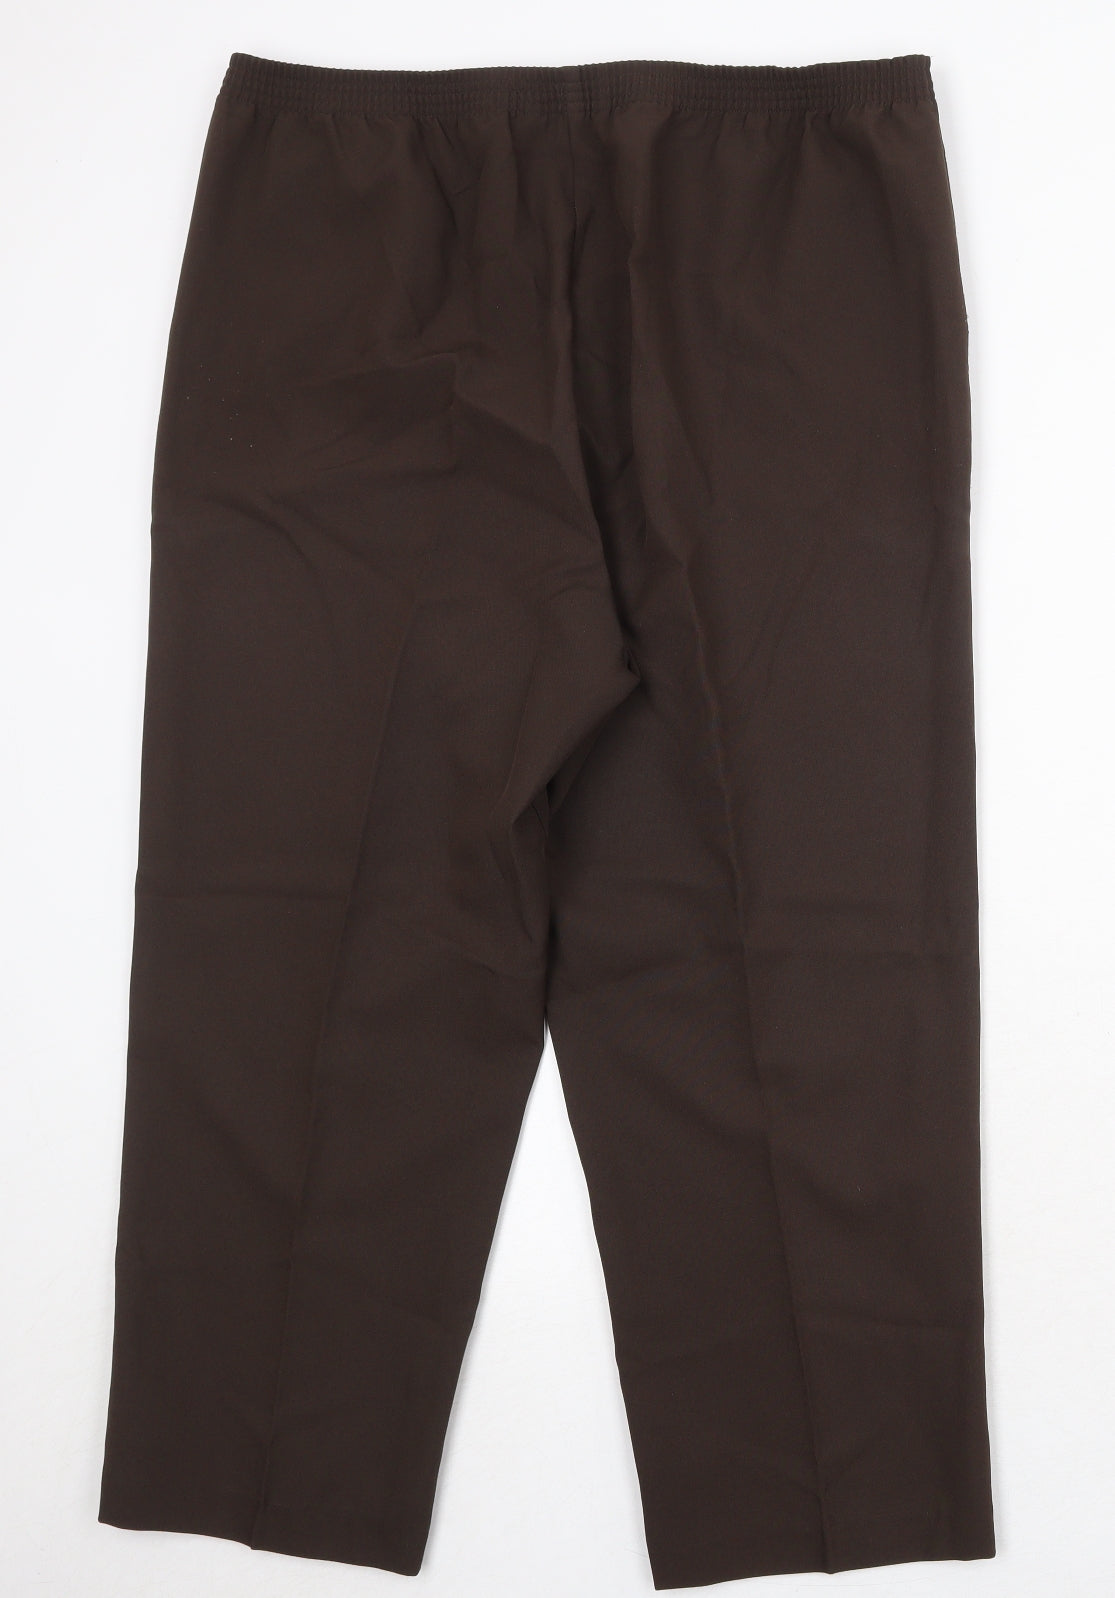 Bonmarché Womens Brown Polyester Trousers Size 16 Regular